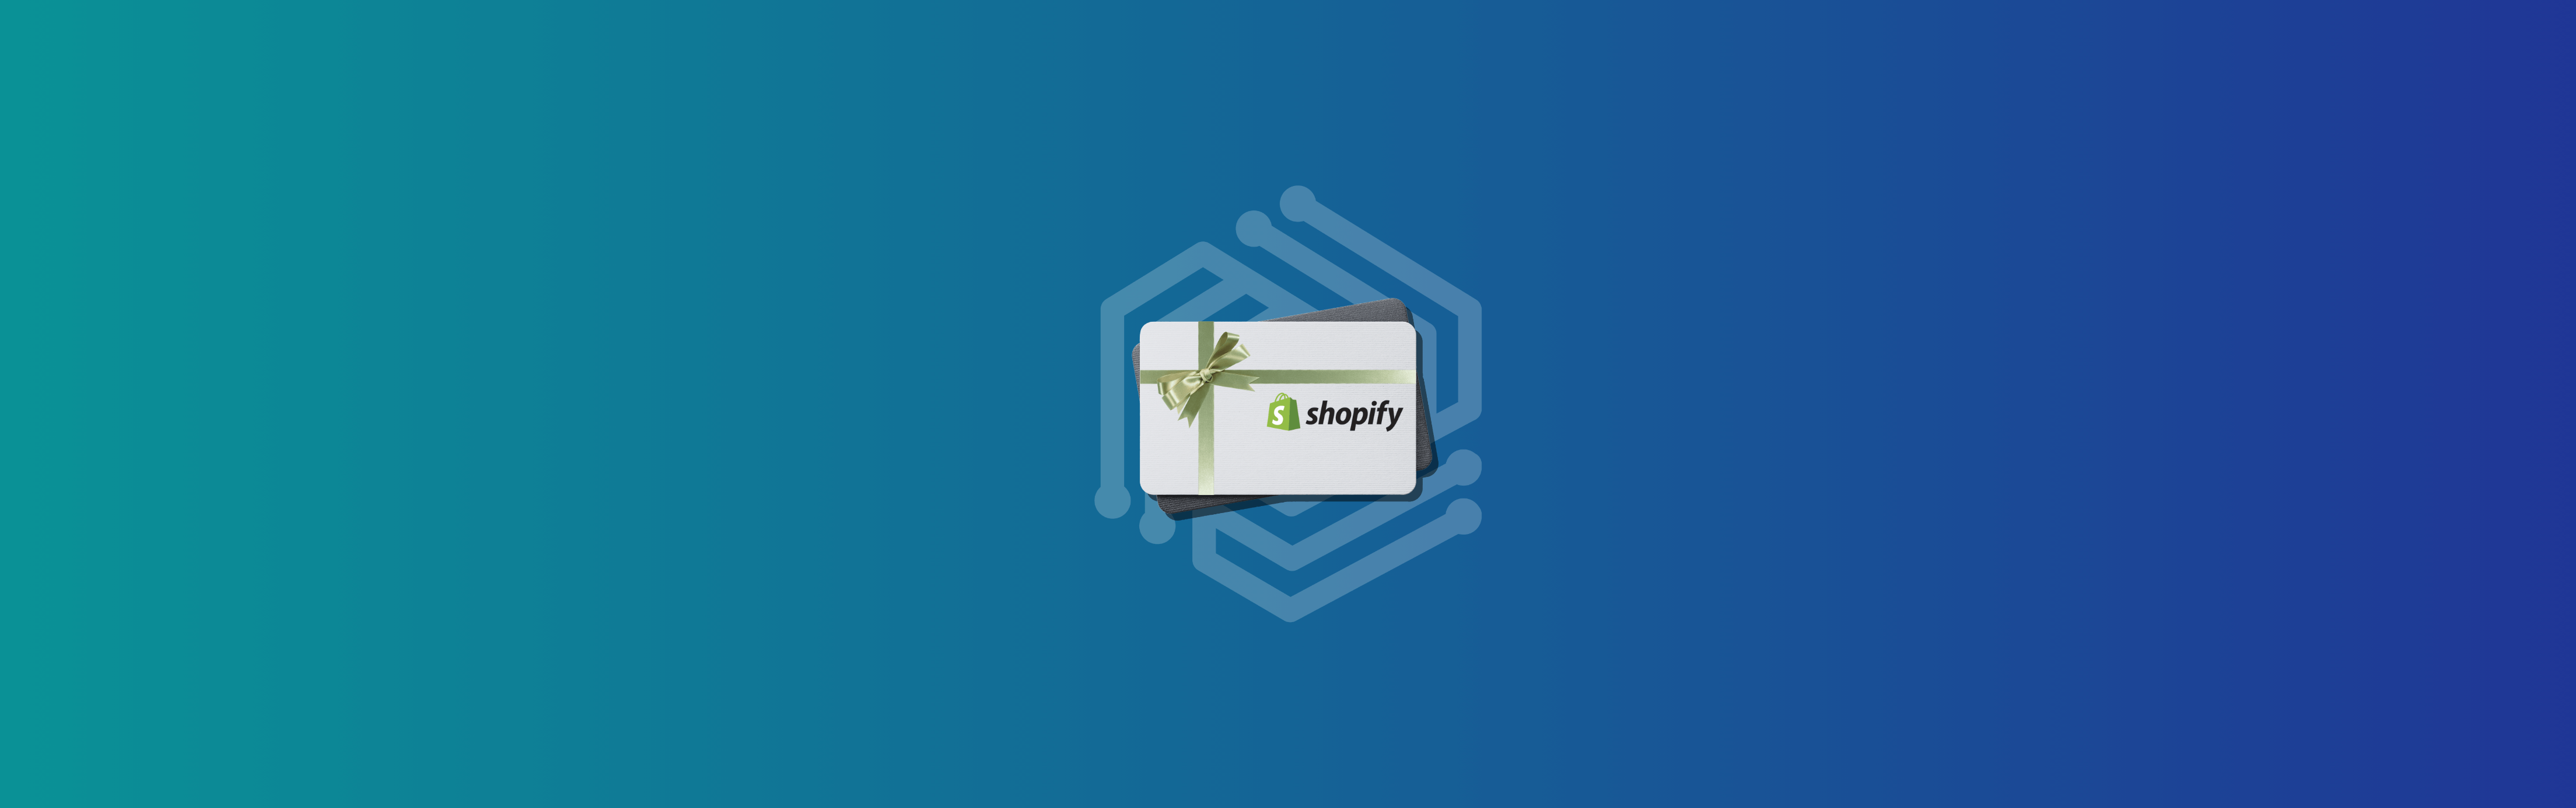 Accounting for Gift Cards Made Easy: How to Account for Shopify & Square Gift Cards With Synder